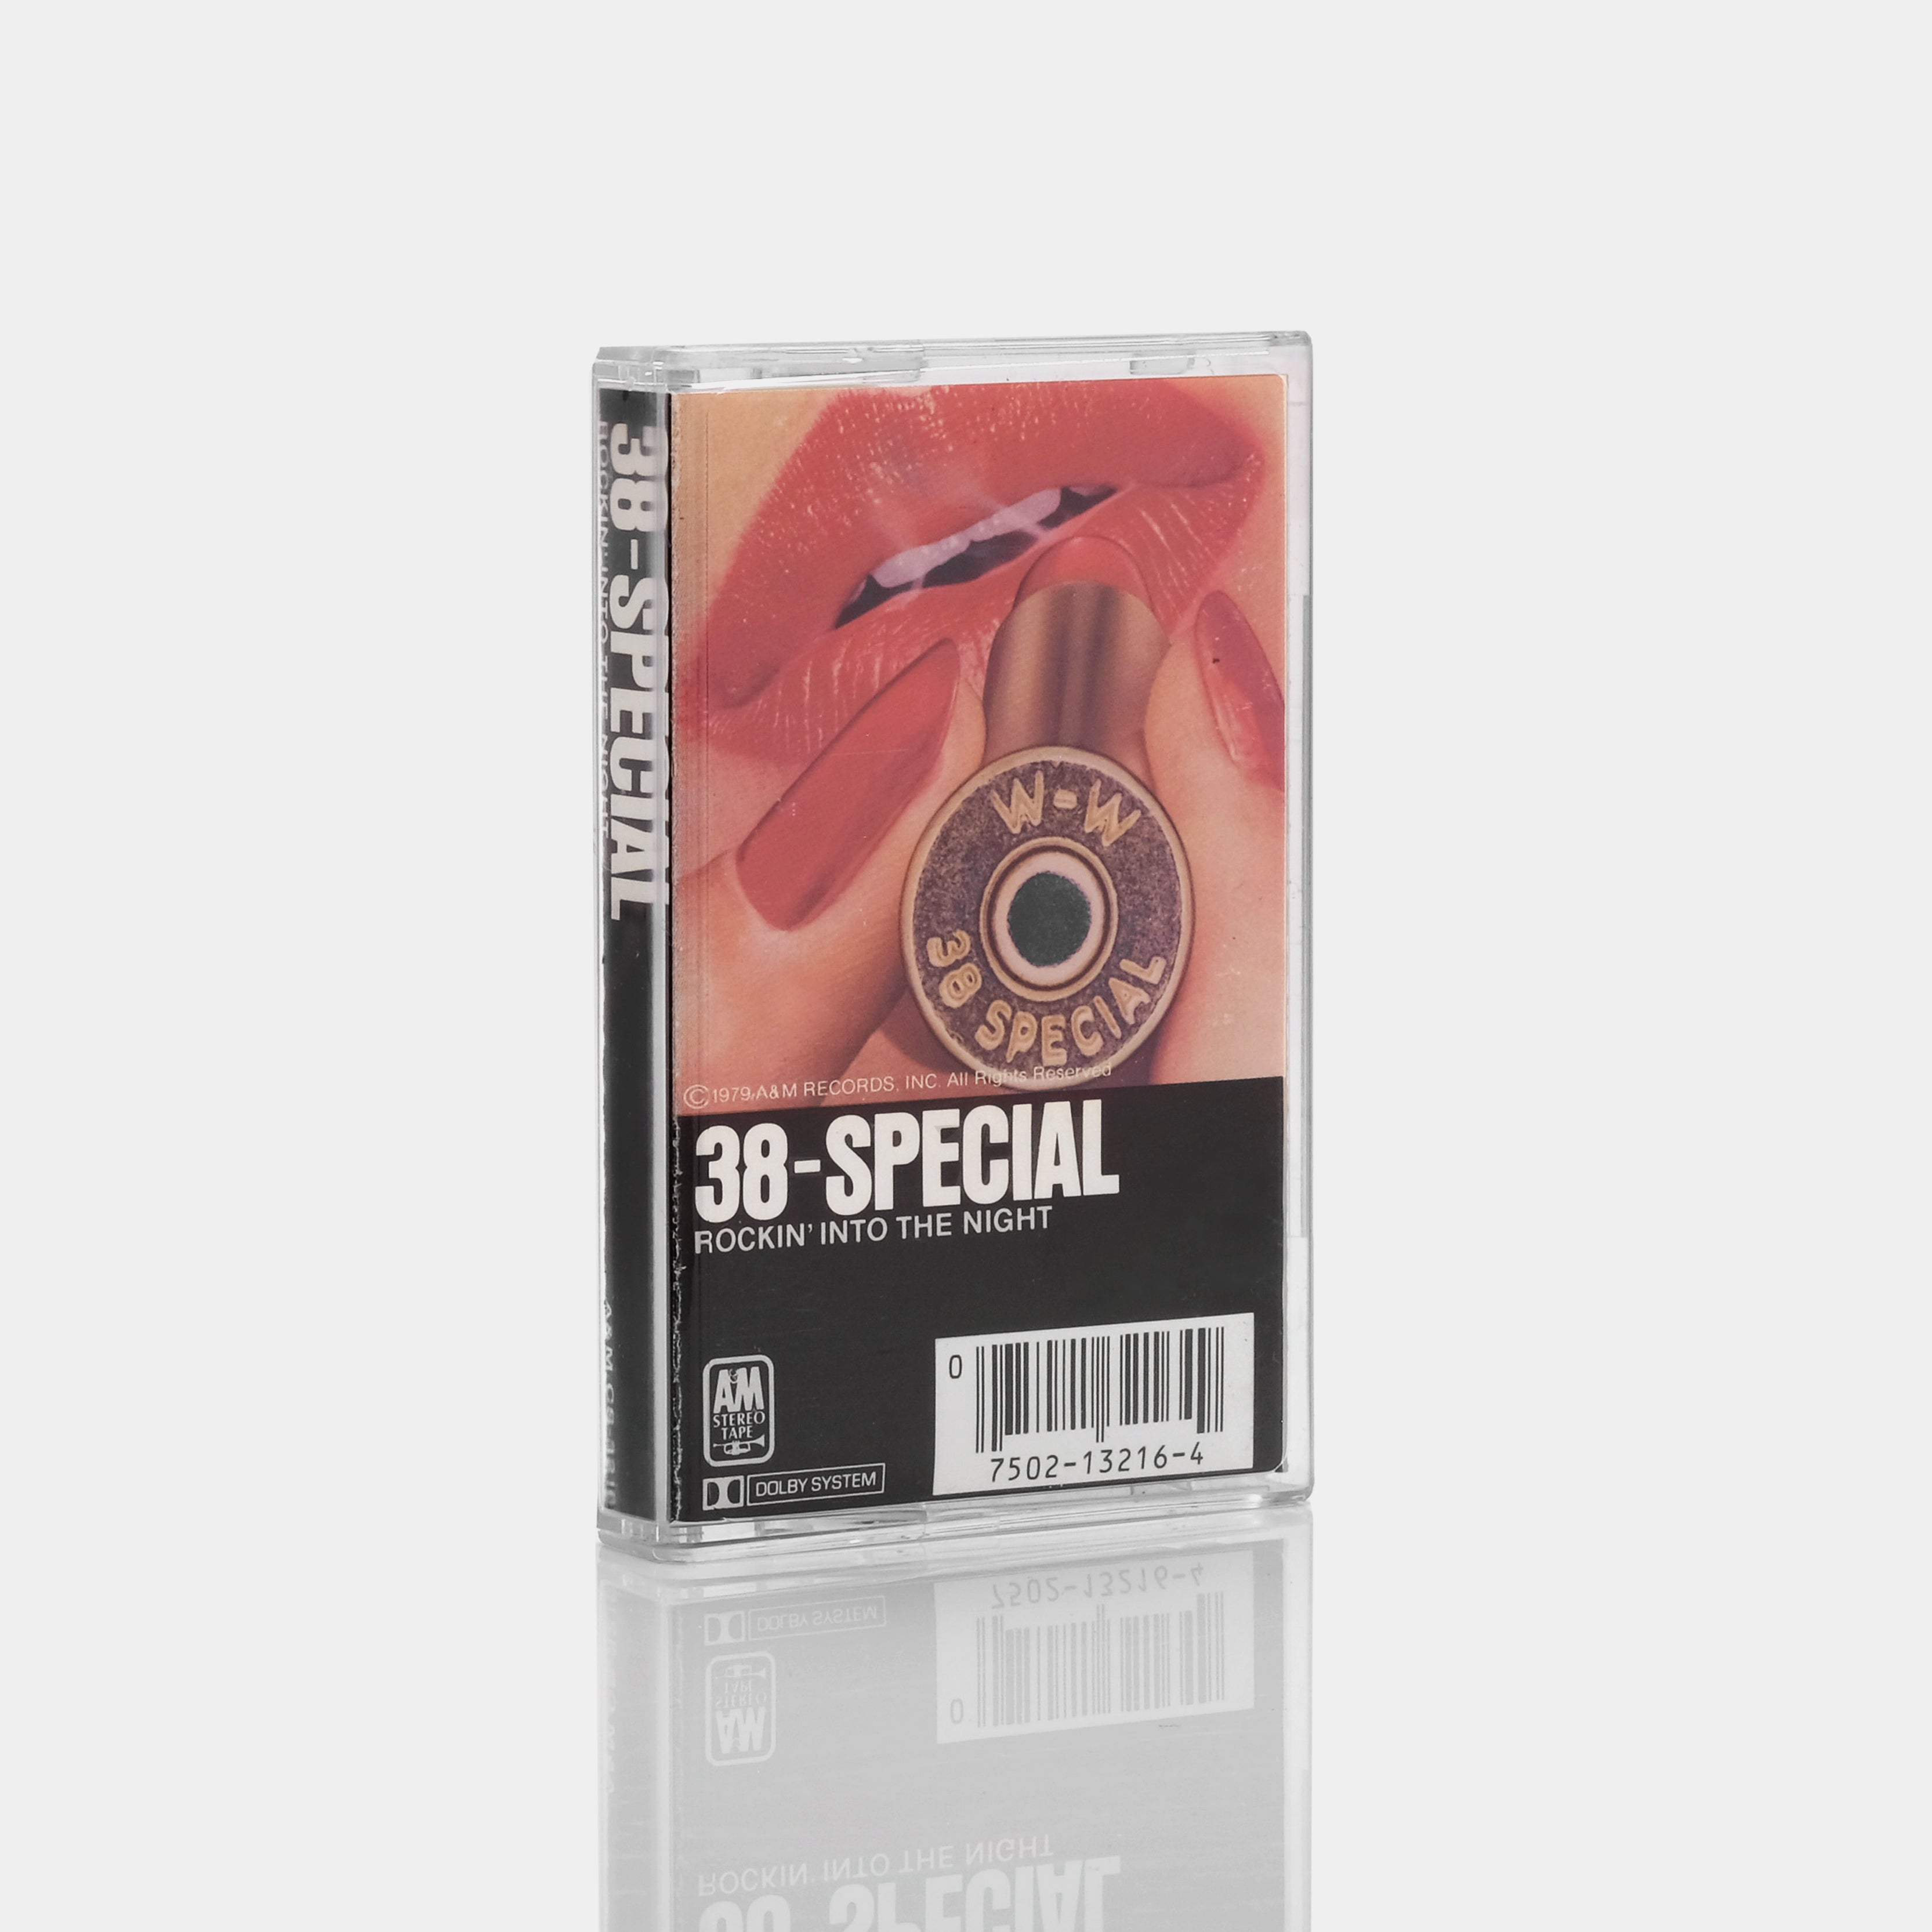 38 Special - Rockin' Into The Night Cassette Tape